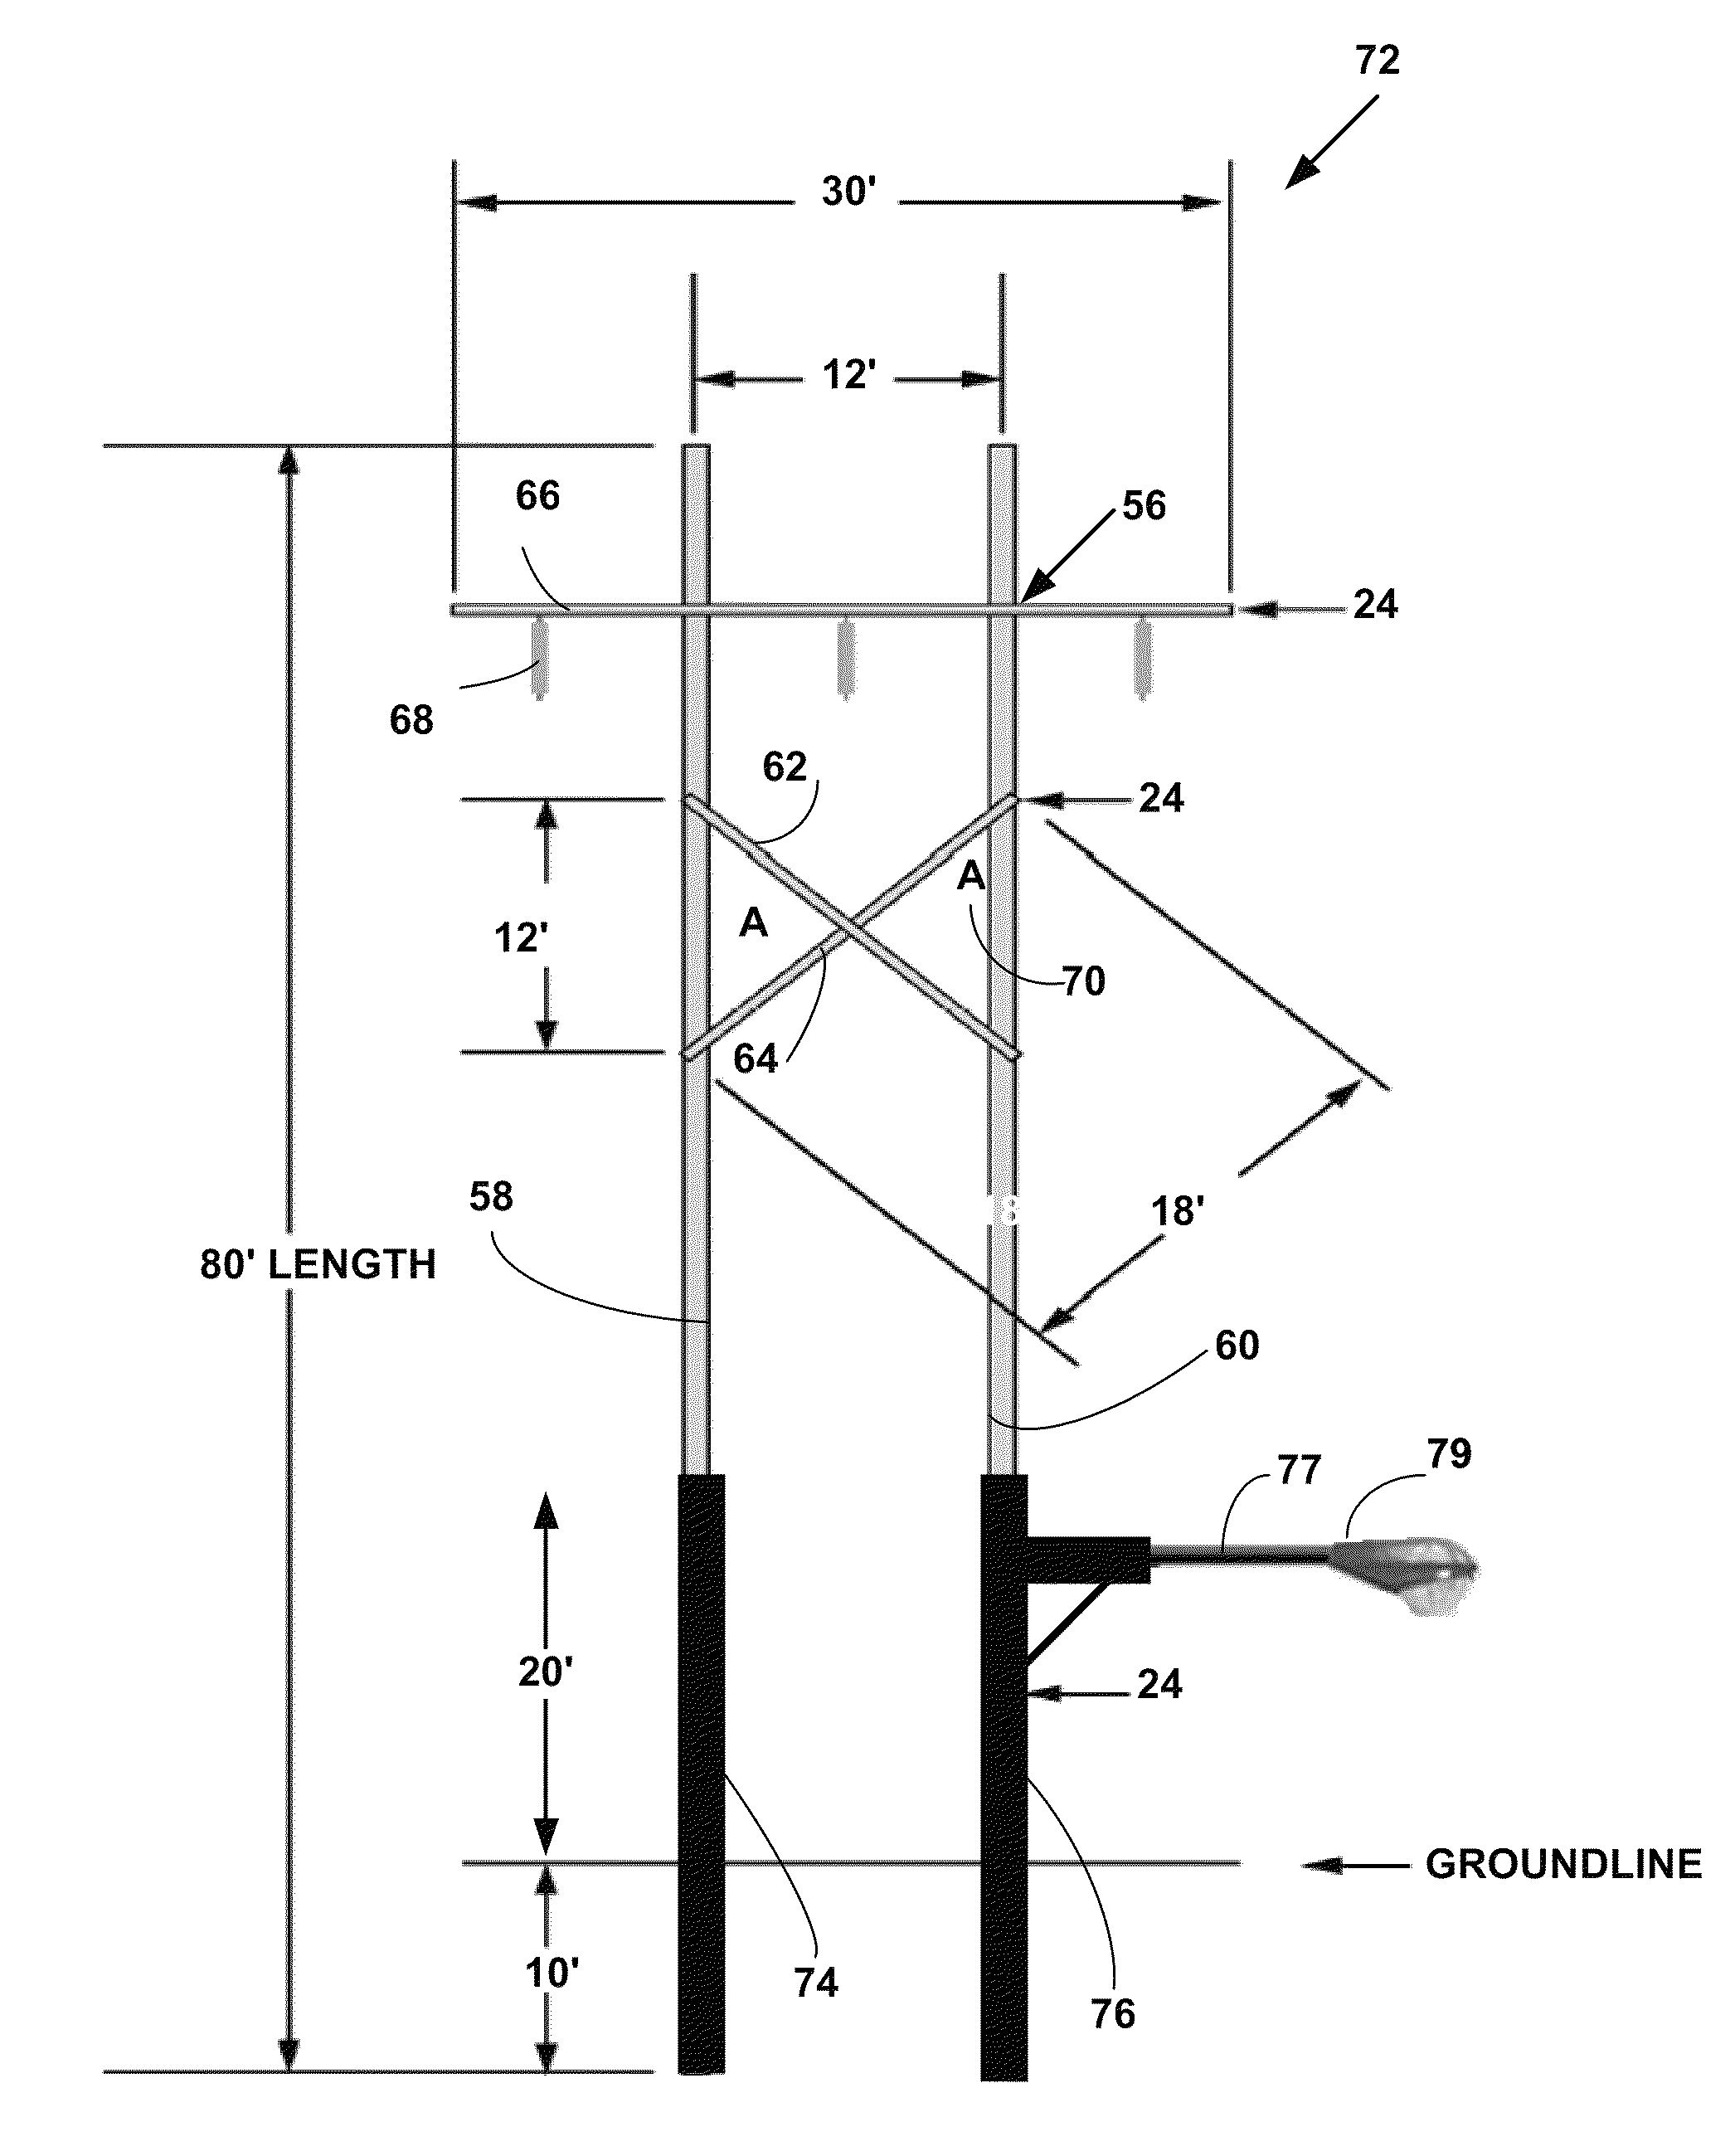 Pultruded utility support structures